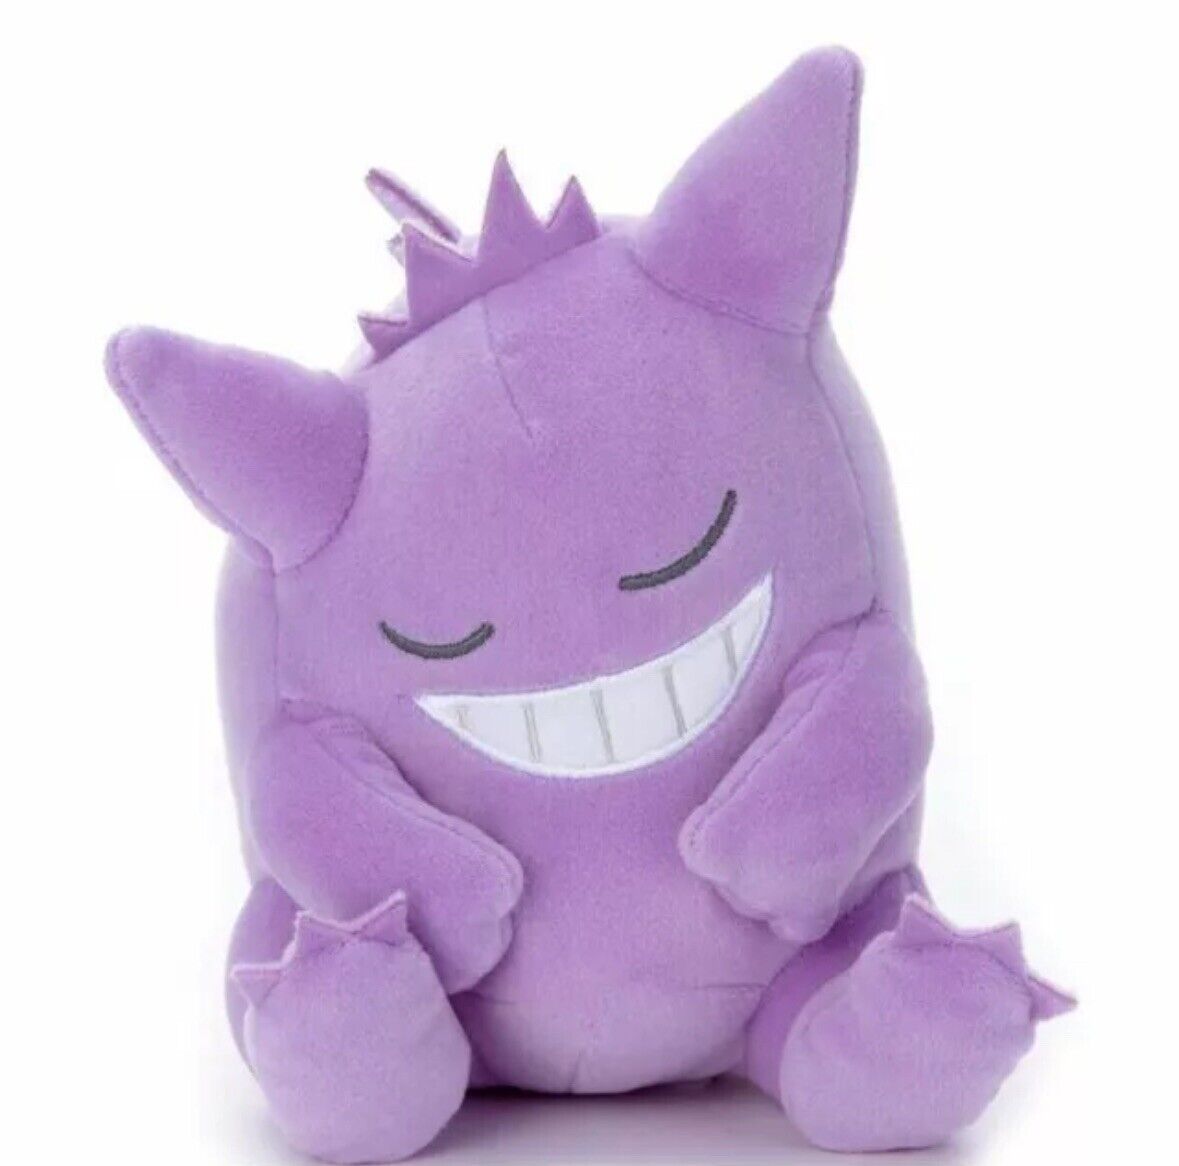 Pokemon Gengar Sleeping Friend Plush Toy 7in- Very Soft And Snuggly